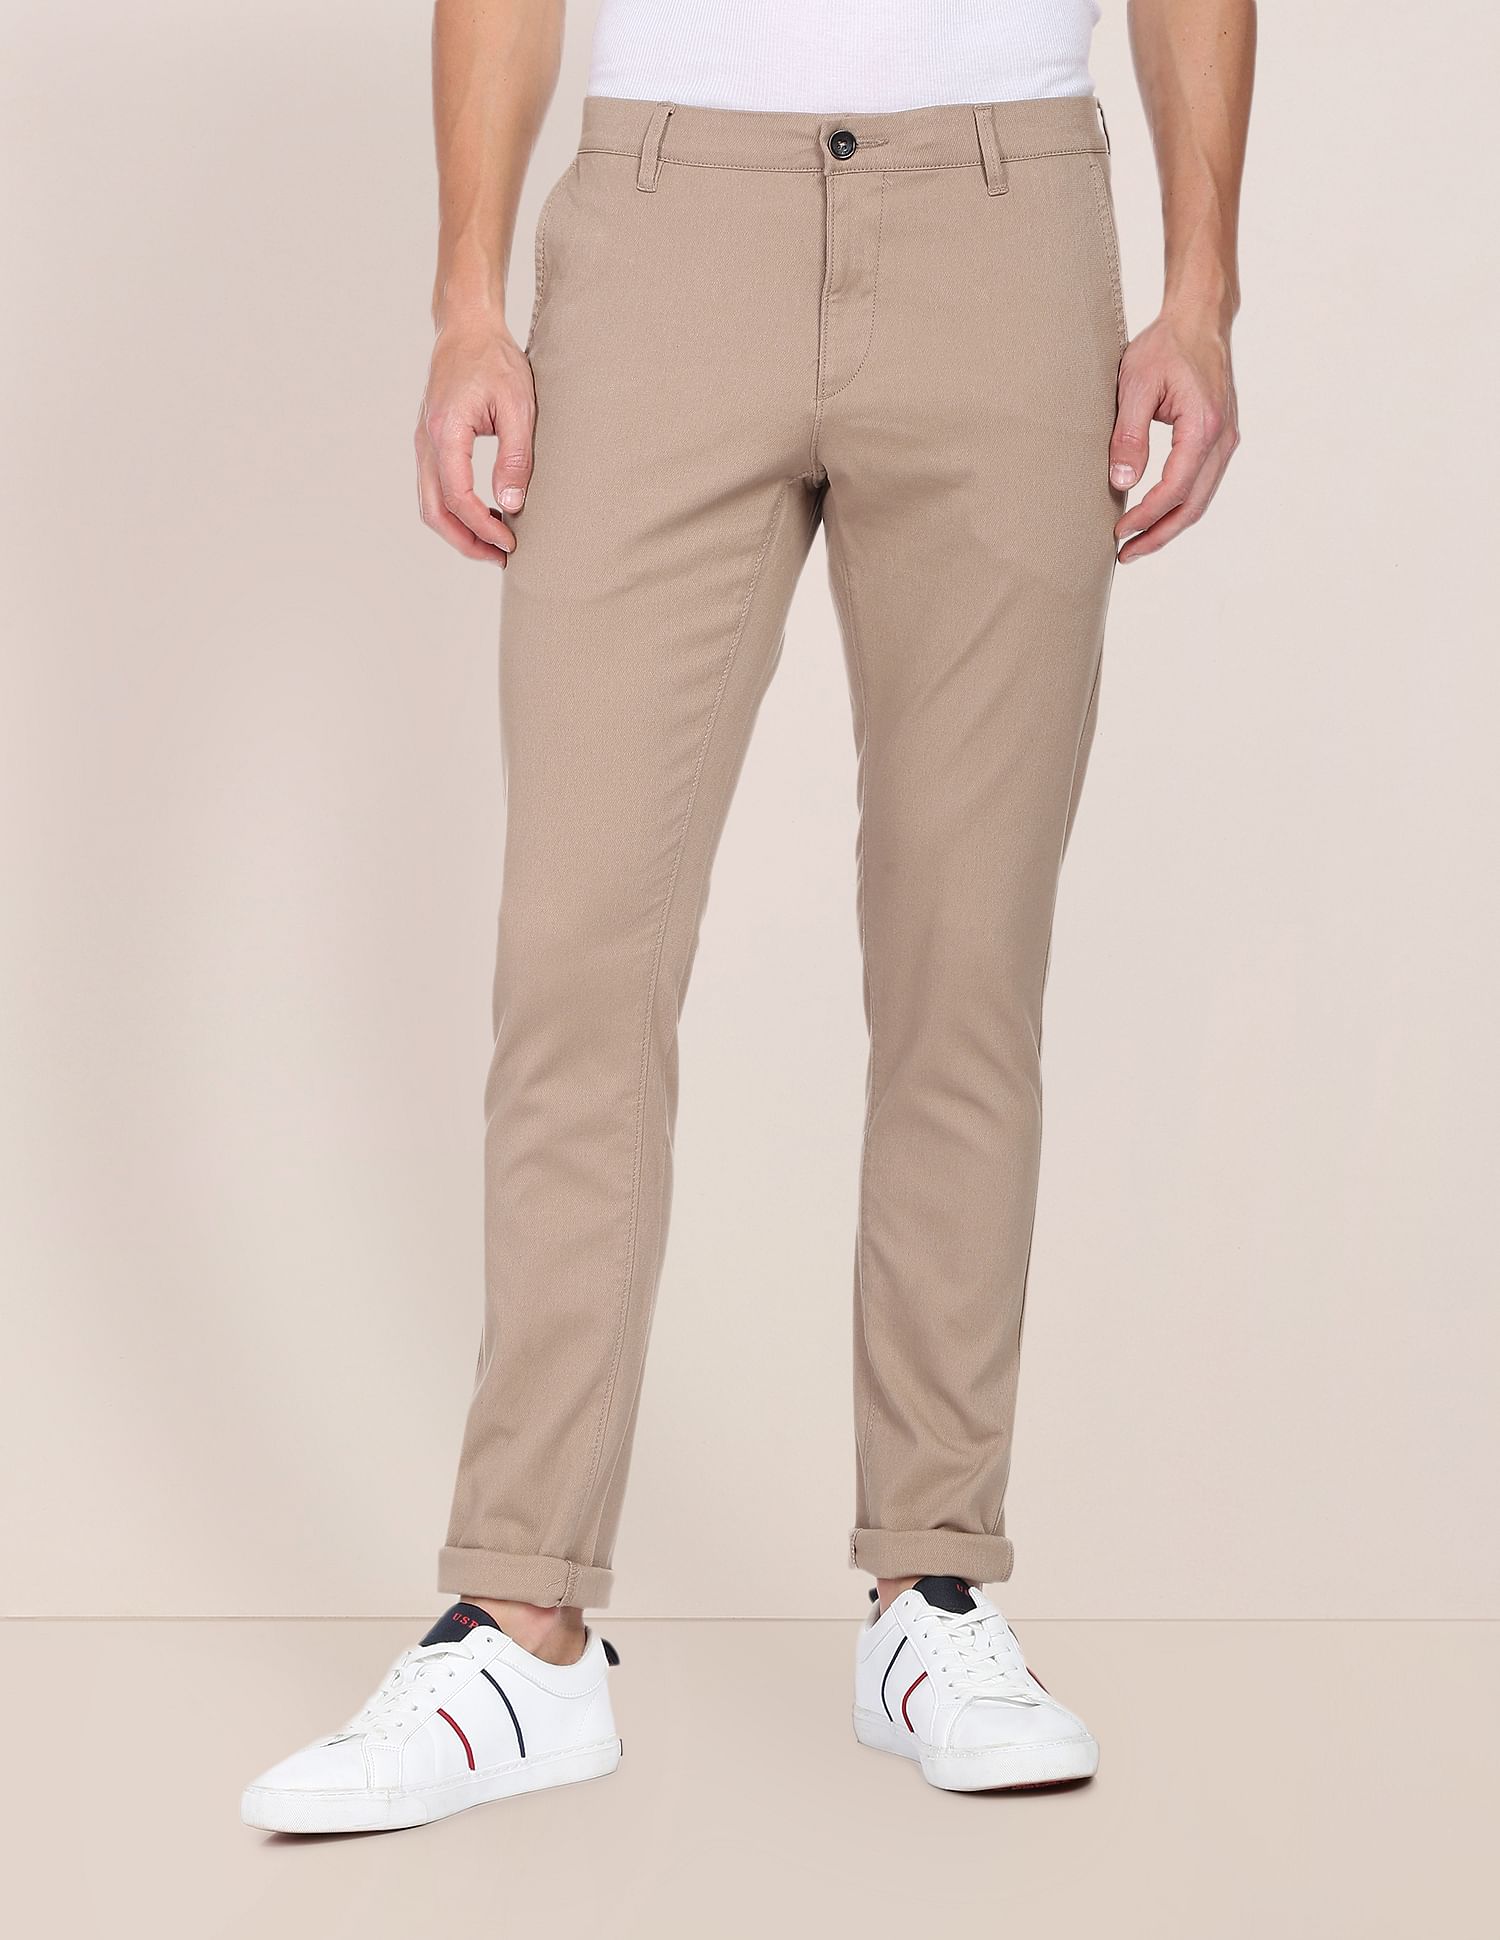 12 Best Trousers Styles for Men Different Types of Pants